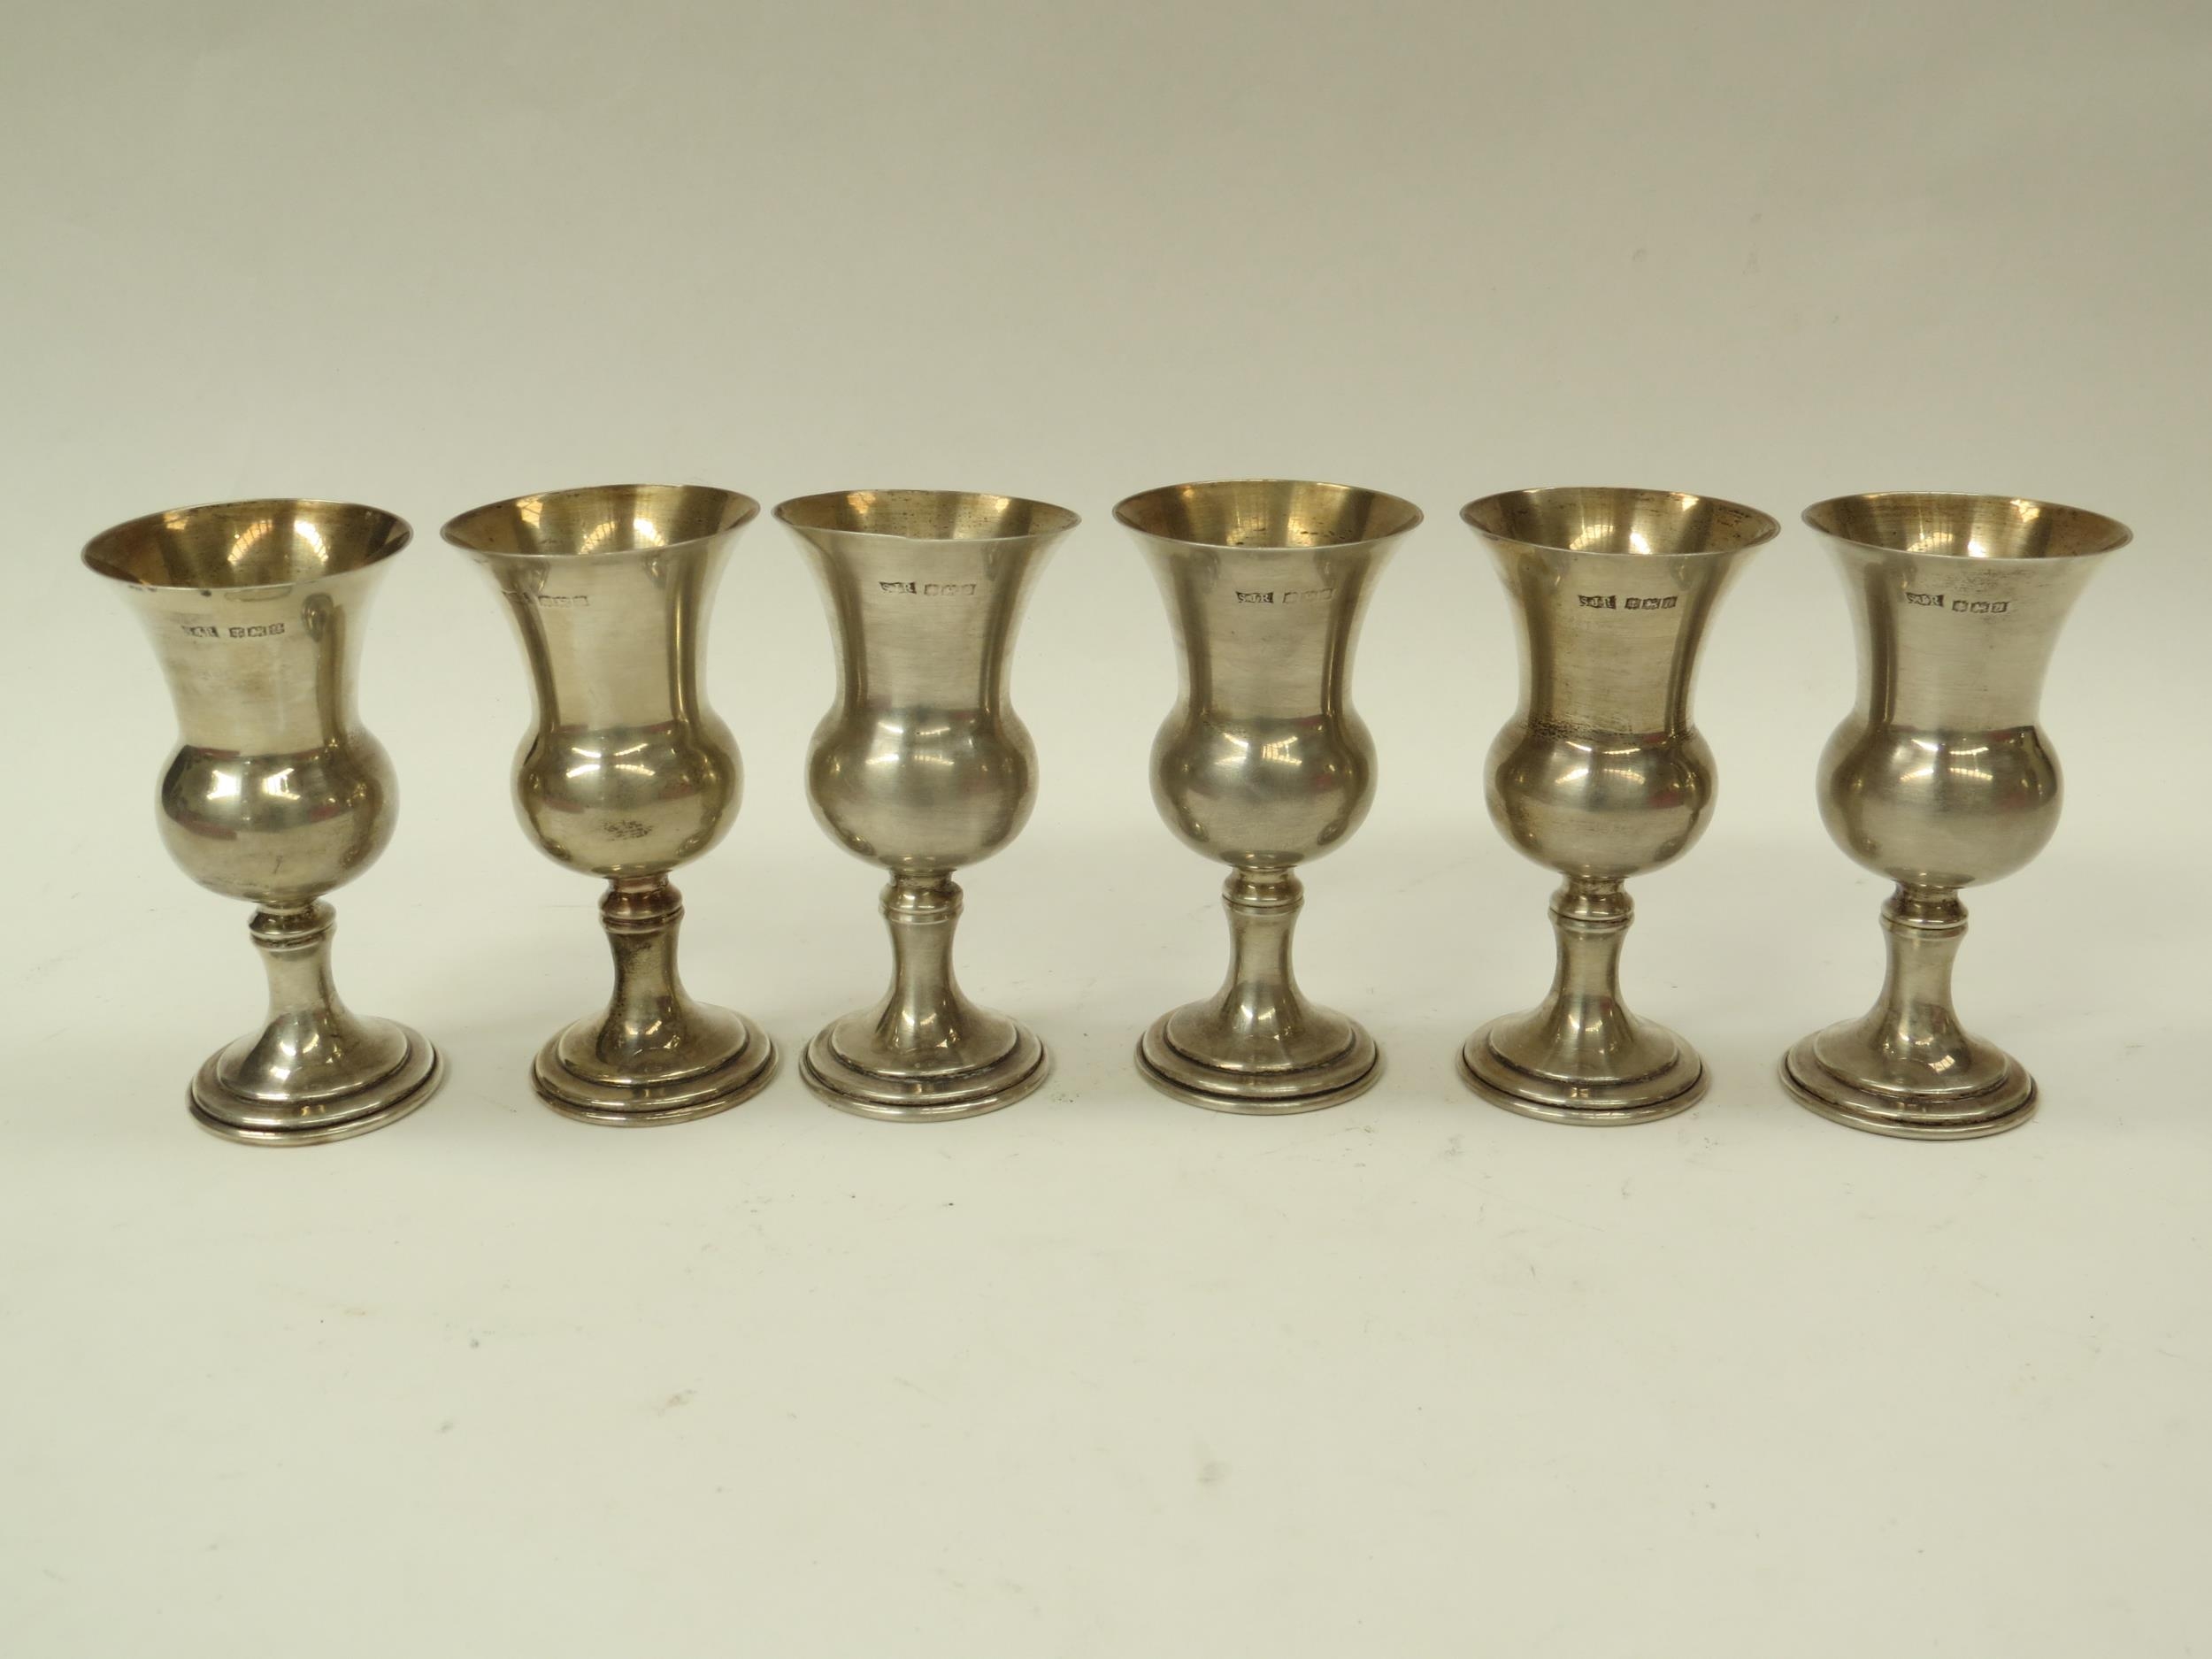 S.J. Rose & Son set of six silver sherry/port goblets, Birmingham 1969 in case, 10cm tall, 346g - Image 2 of 2